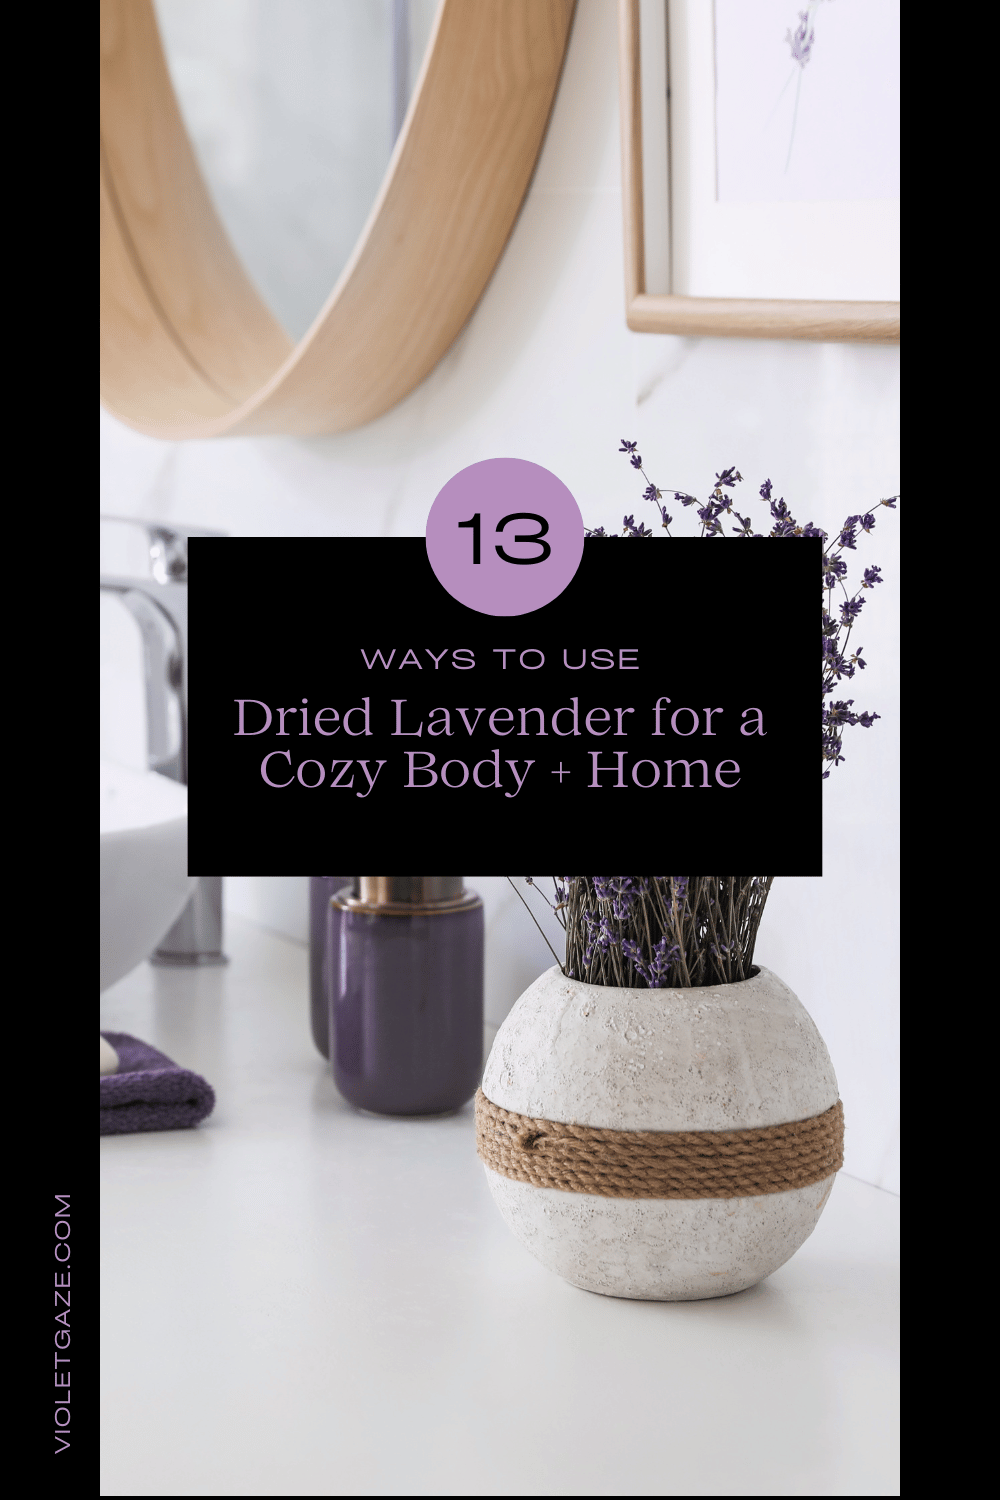 13 ways to use dried lavender for a cozy body and home info graphic with background of dried lavender sitting on table